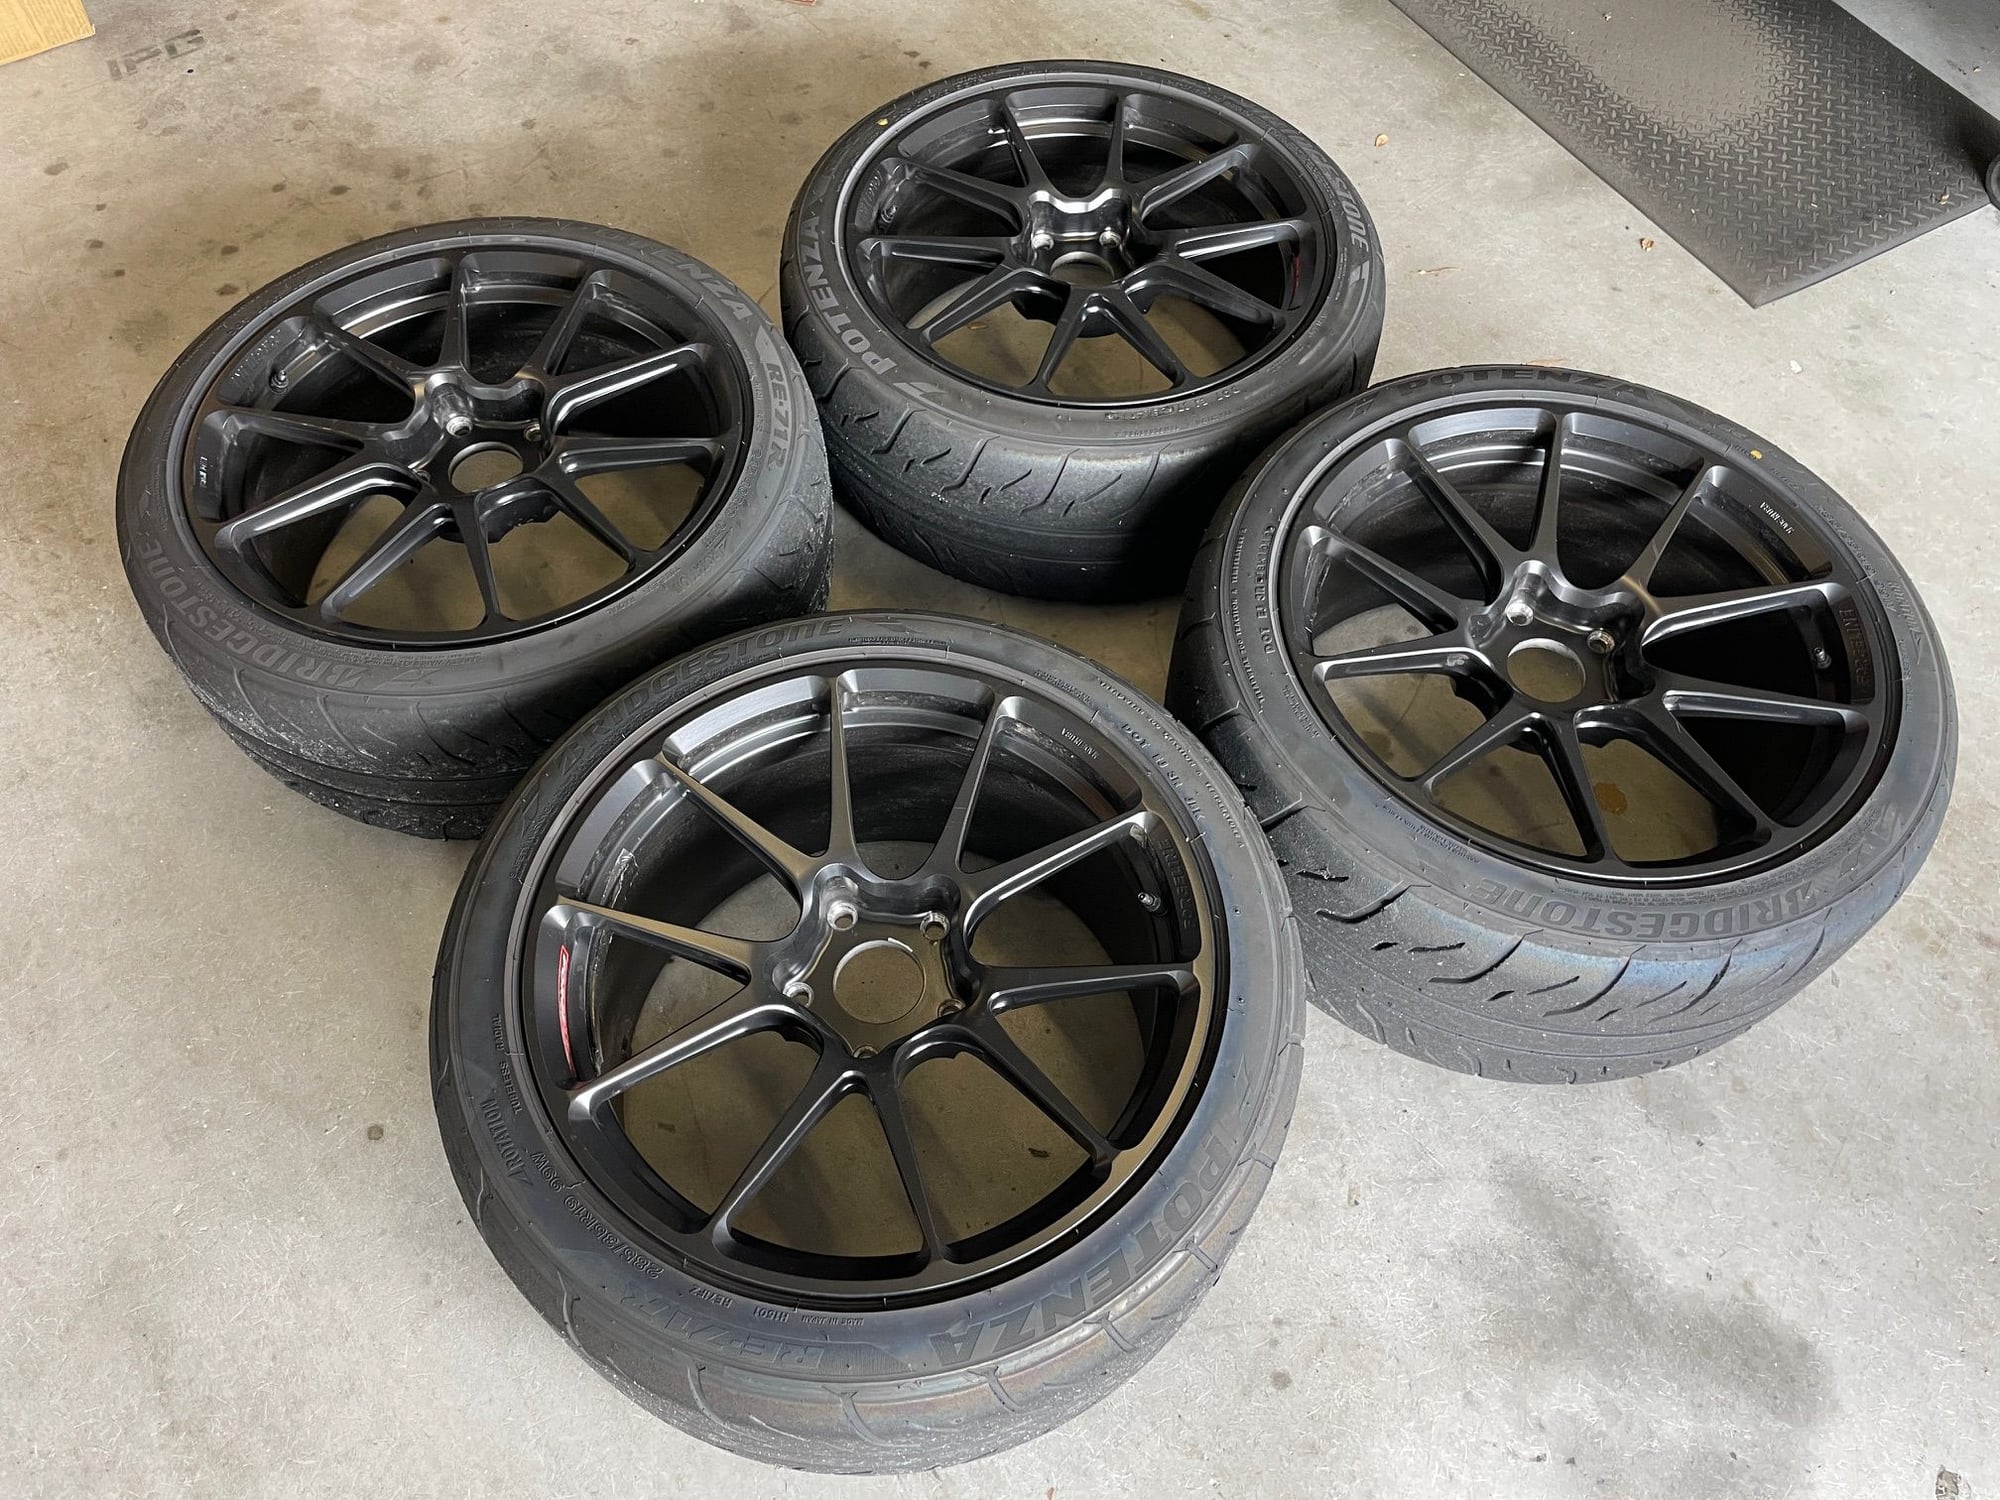 Wheels and Tires/Axles - FS: (7) 19" Black Forgeline GS1R Wheels with RE71r Tires for Cayman GT4 - Used - Lake Mary, FL 32746, United States